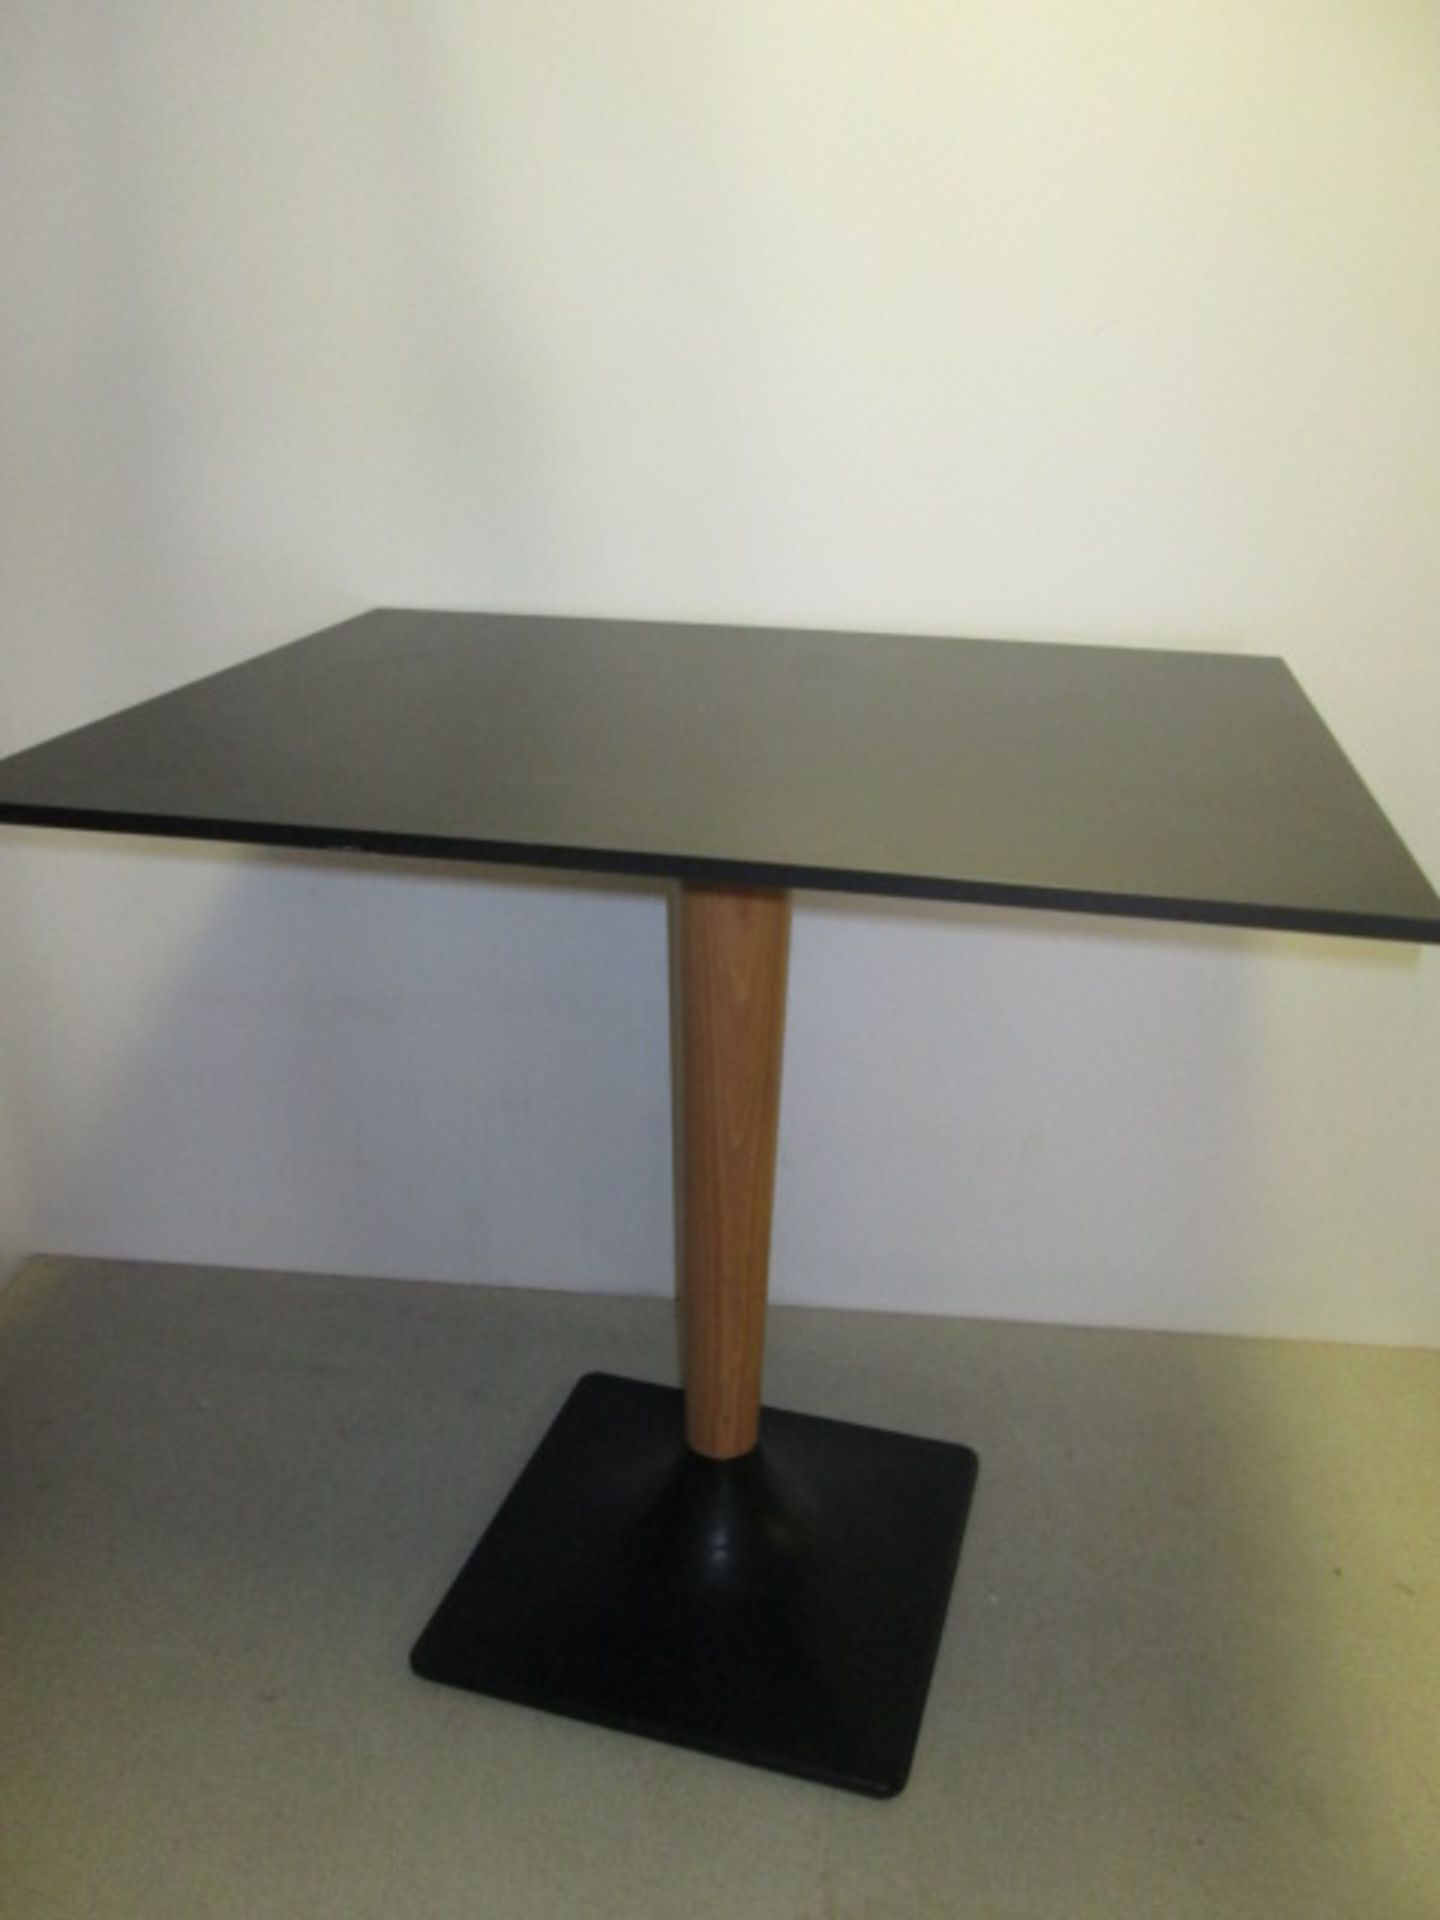 1 x Pedrali Black Laminate Topped Restaurant Table on Wooden Support & Cast Iron Base, Size 80cm x